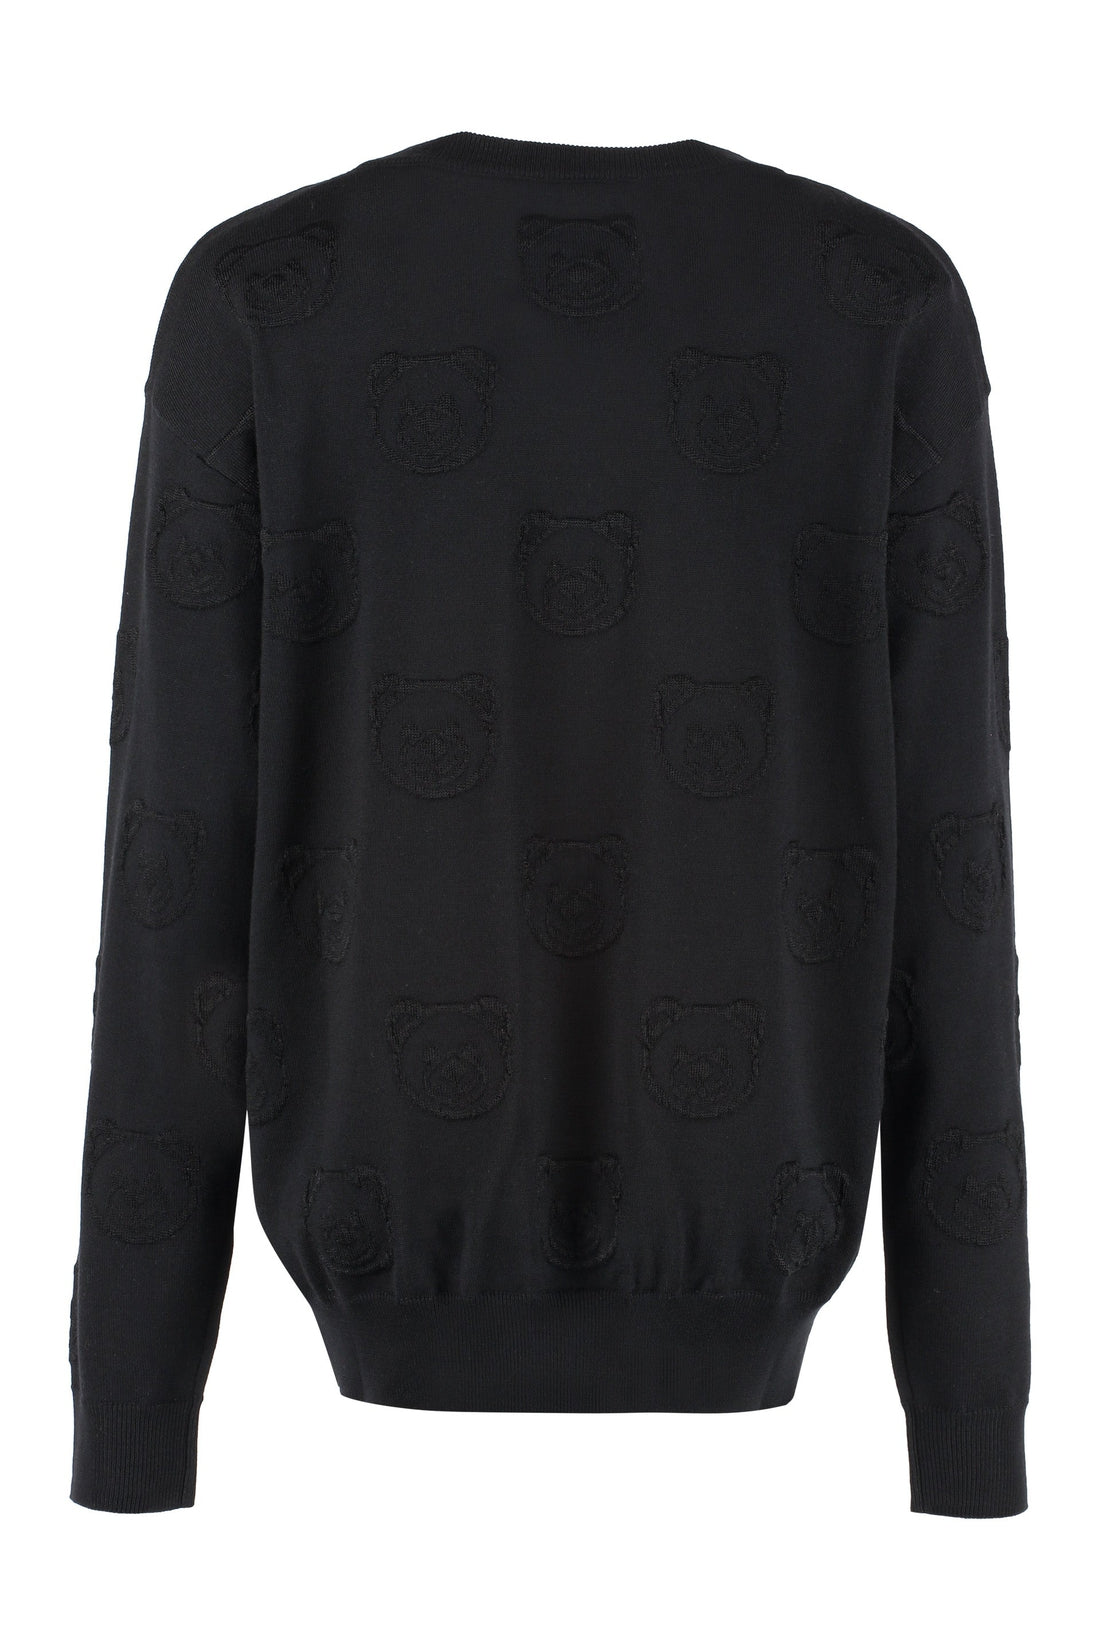 Moschino-OUTLET-SALE-Virgin wool sweater-ARCHIVIST